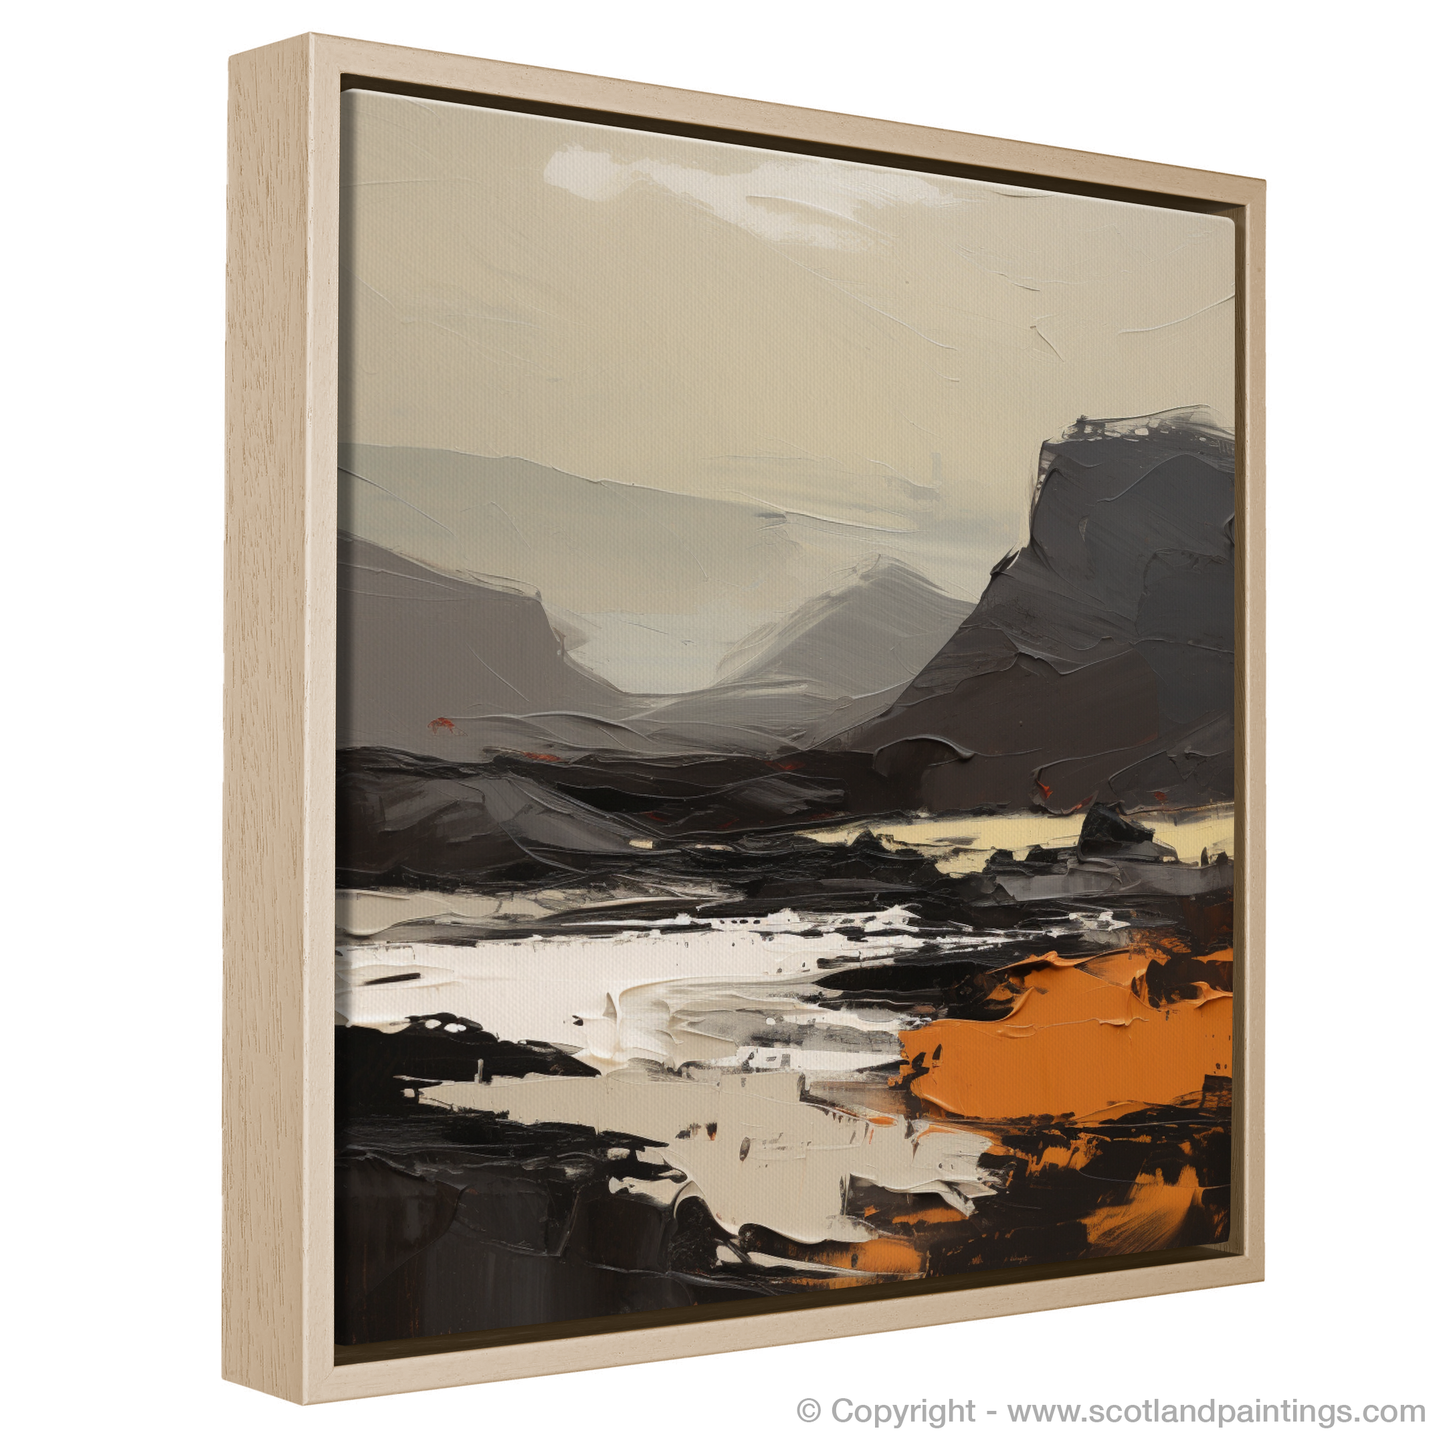 Painting and Art Print of Driesh entitled "Driesh Summit: An Expressionist Ode to the Scottish Highlands".